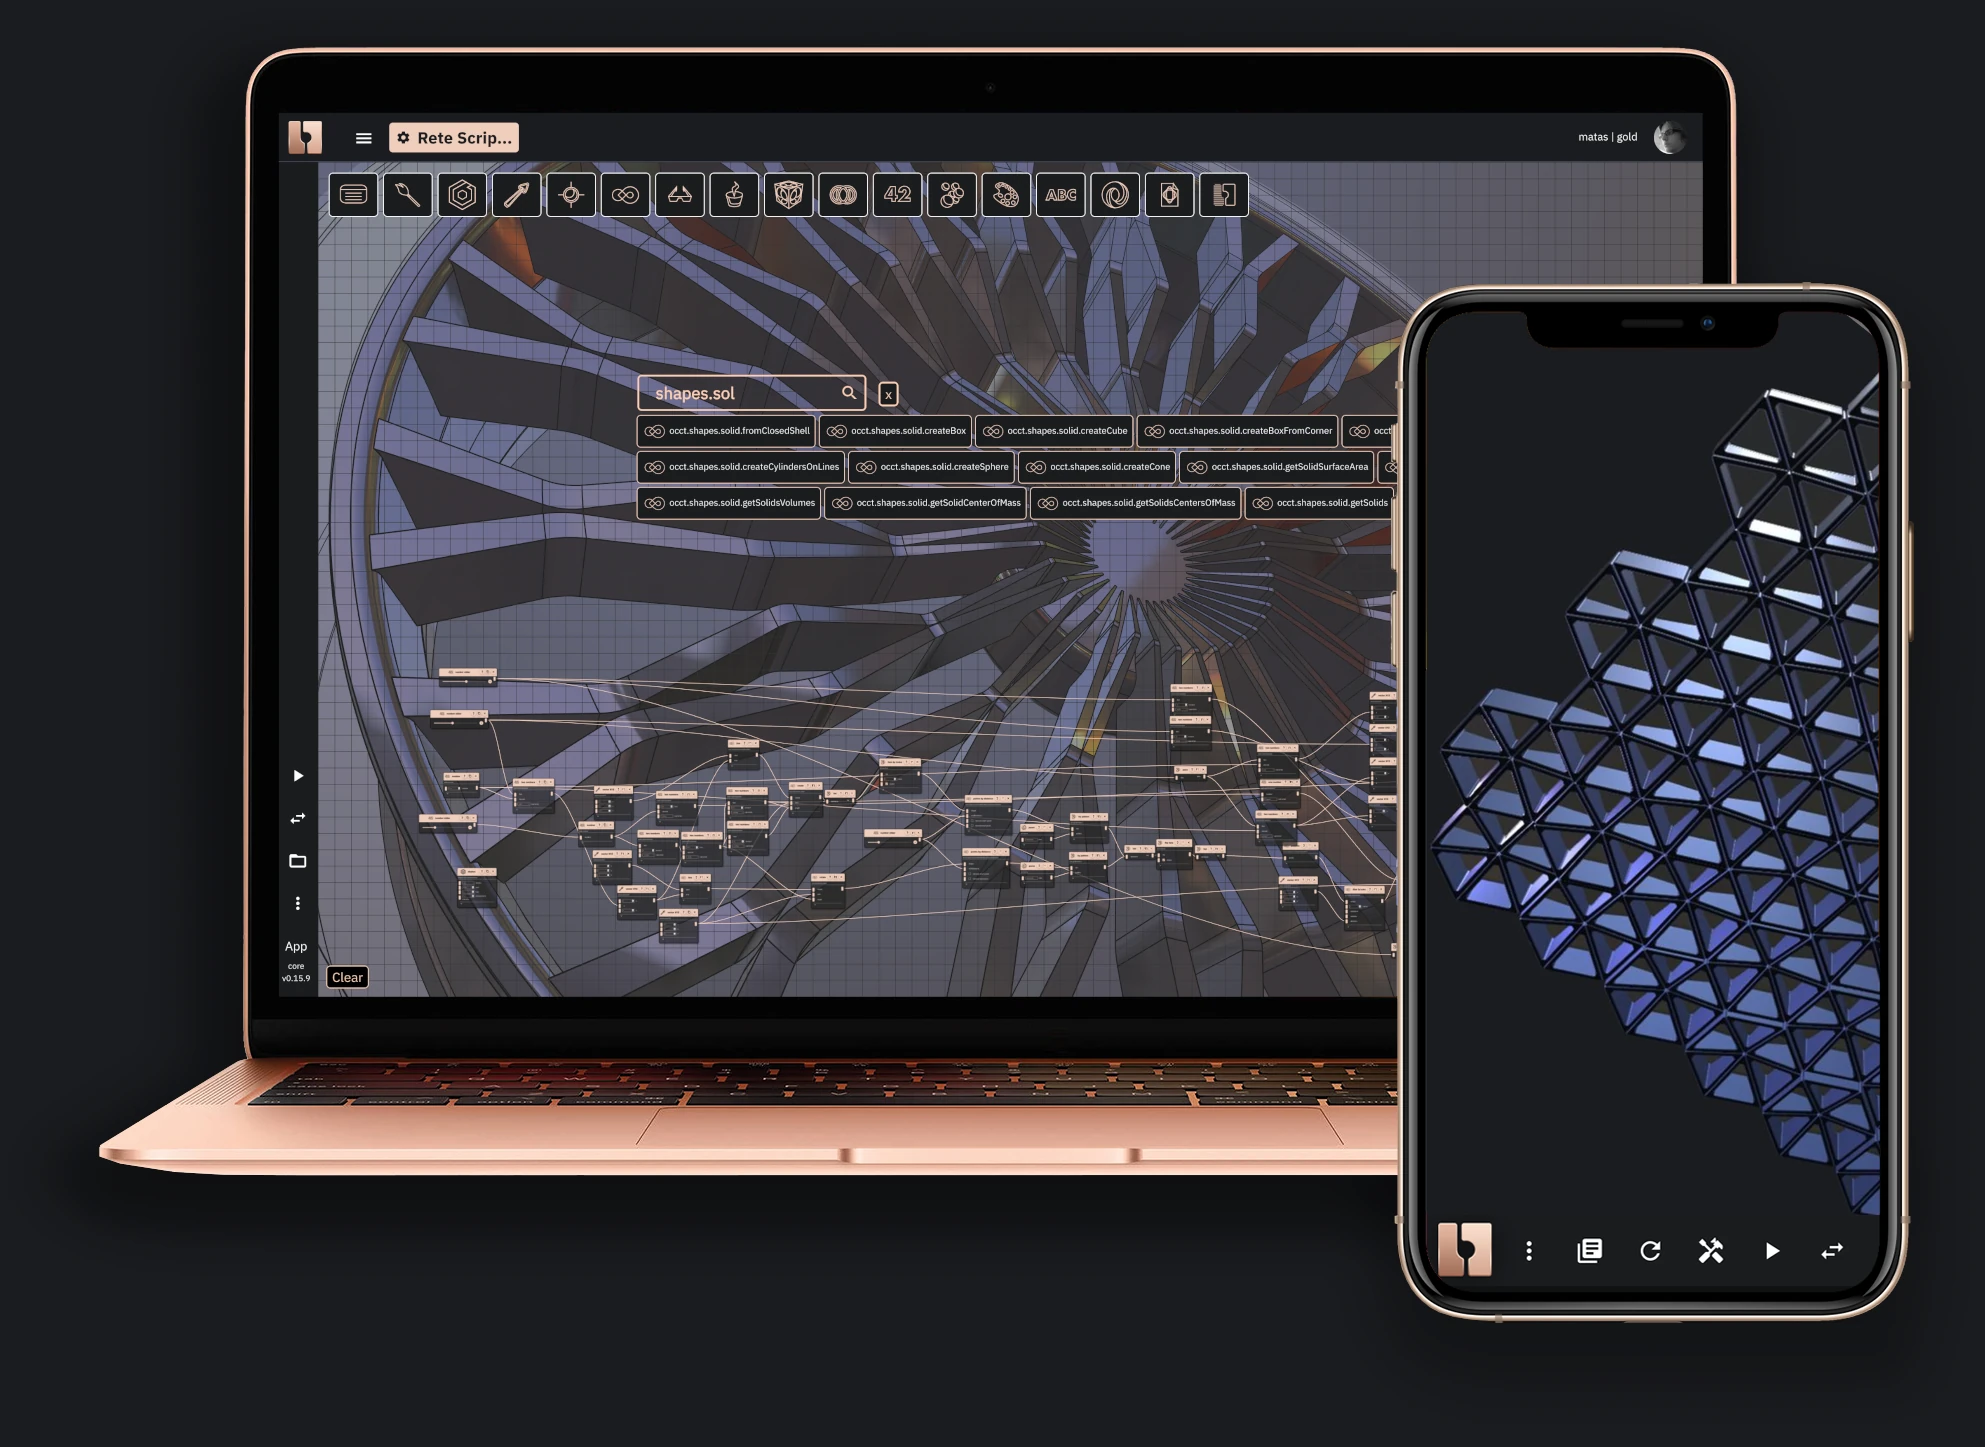 Picture of the macbook pro and an iphone containing software screenshots with visual programming environment for geometry.